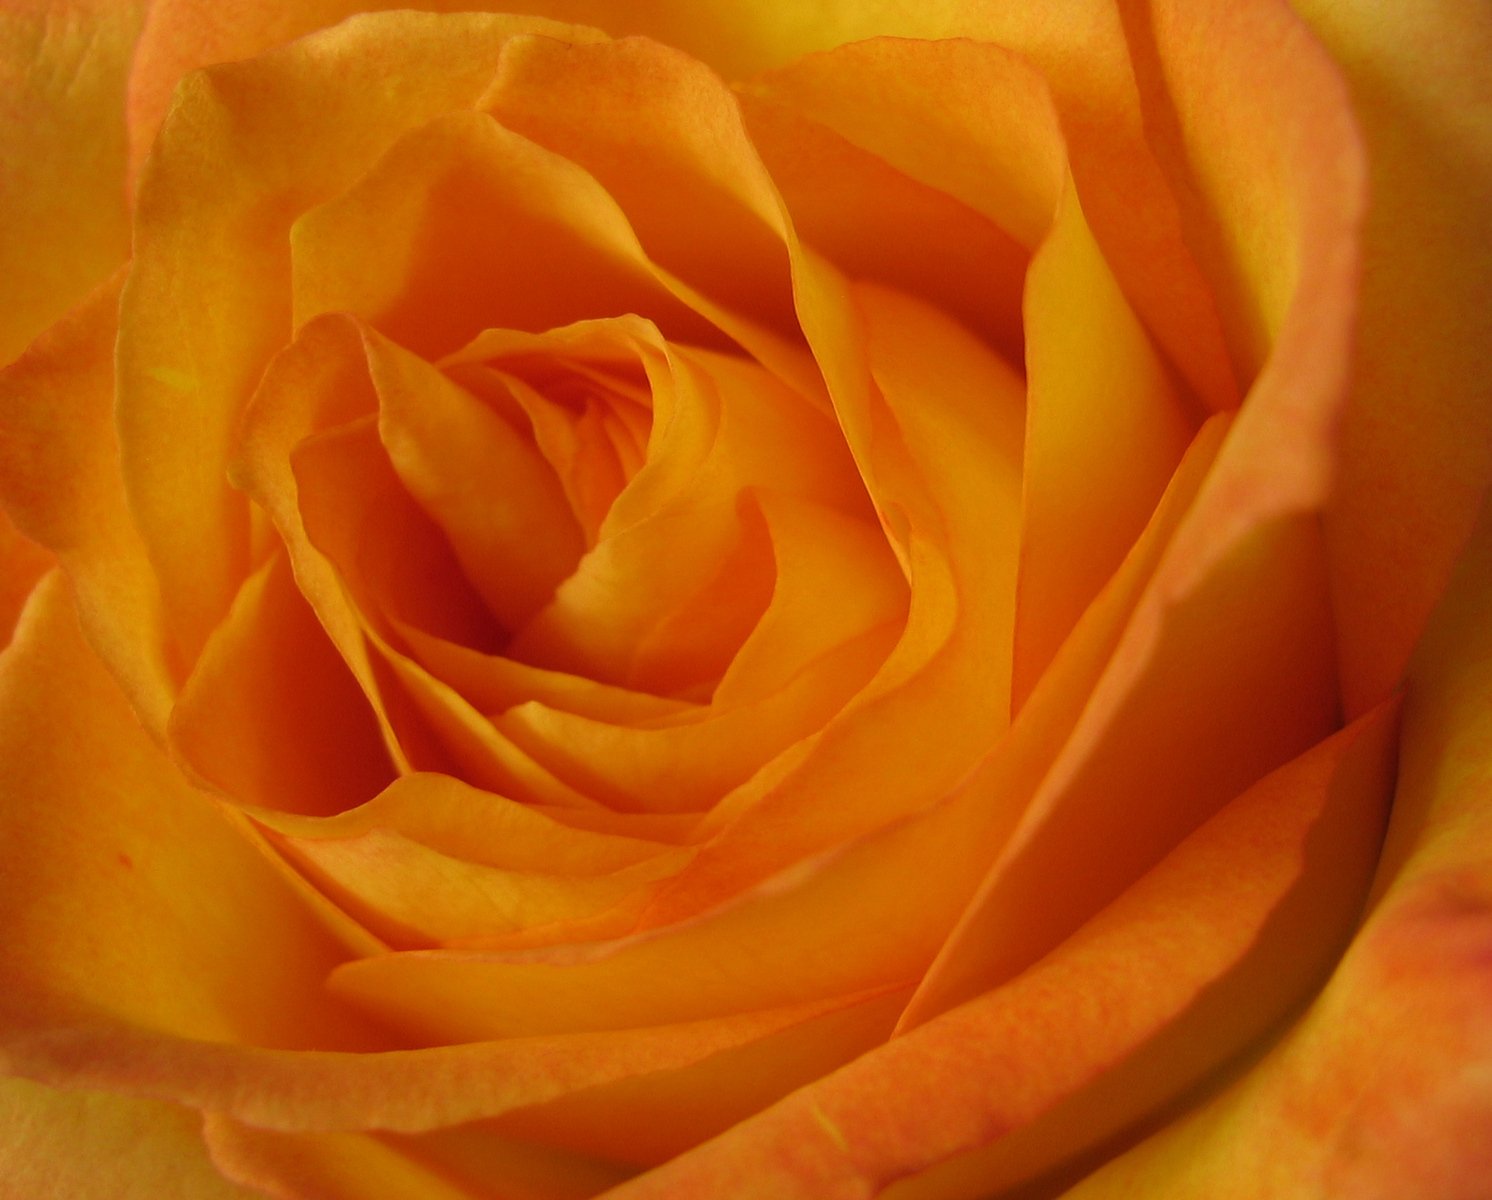 a close - up view of the center of a rose